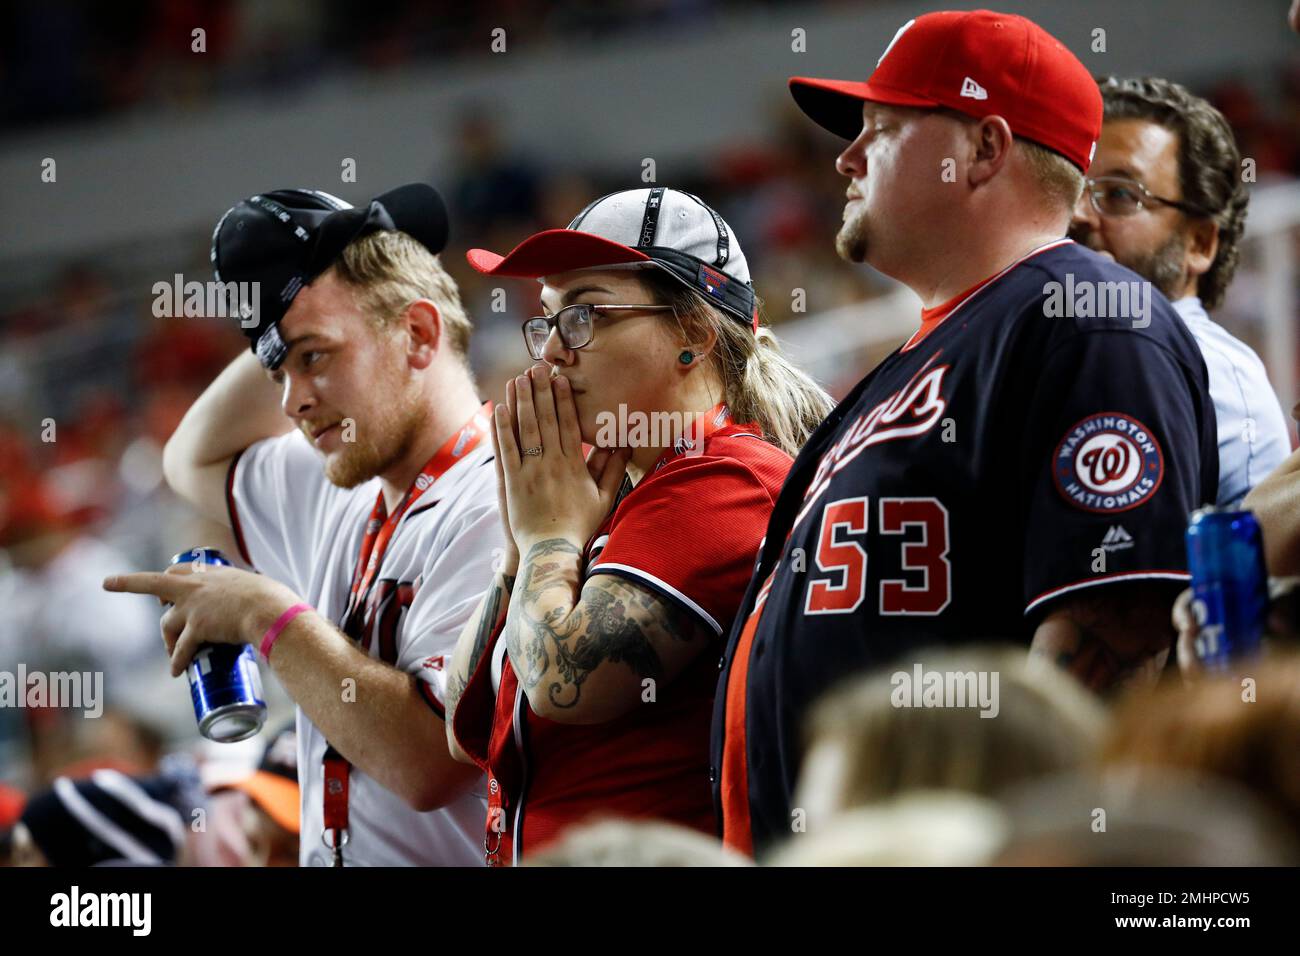 Fans watch during the ninth inning of Game 5 of the baseball World Series between the Houston Astros and the Washington Nationals Sunday, Oct